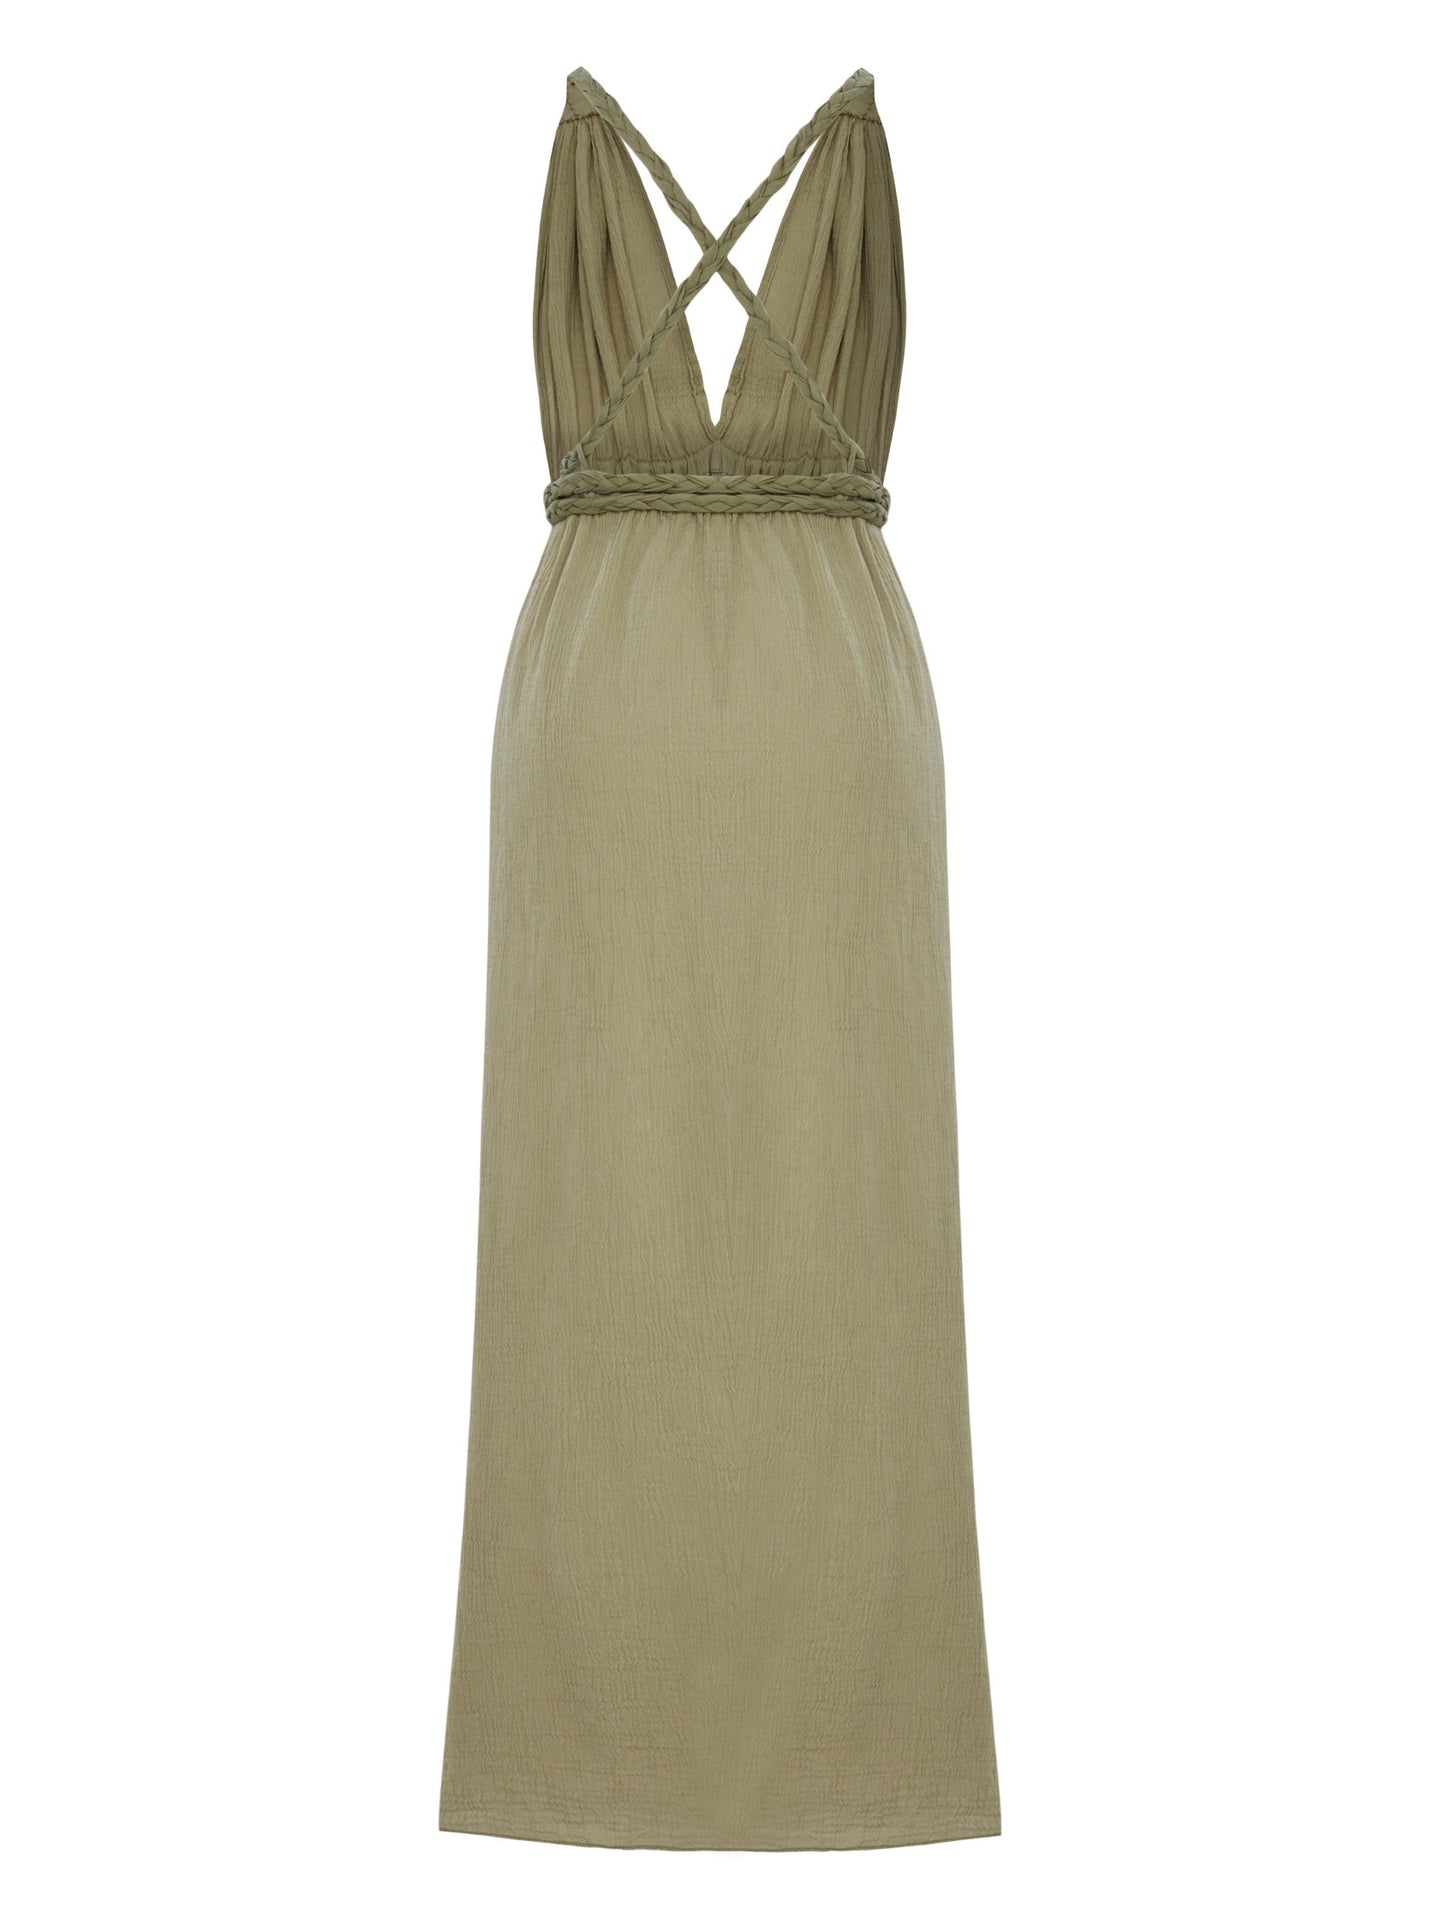 Muse Braided Straps Dress - Khaki Green by The Handloom